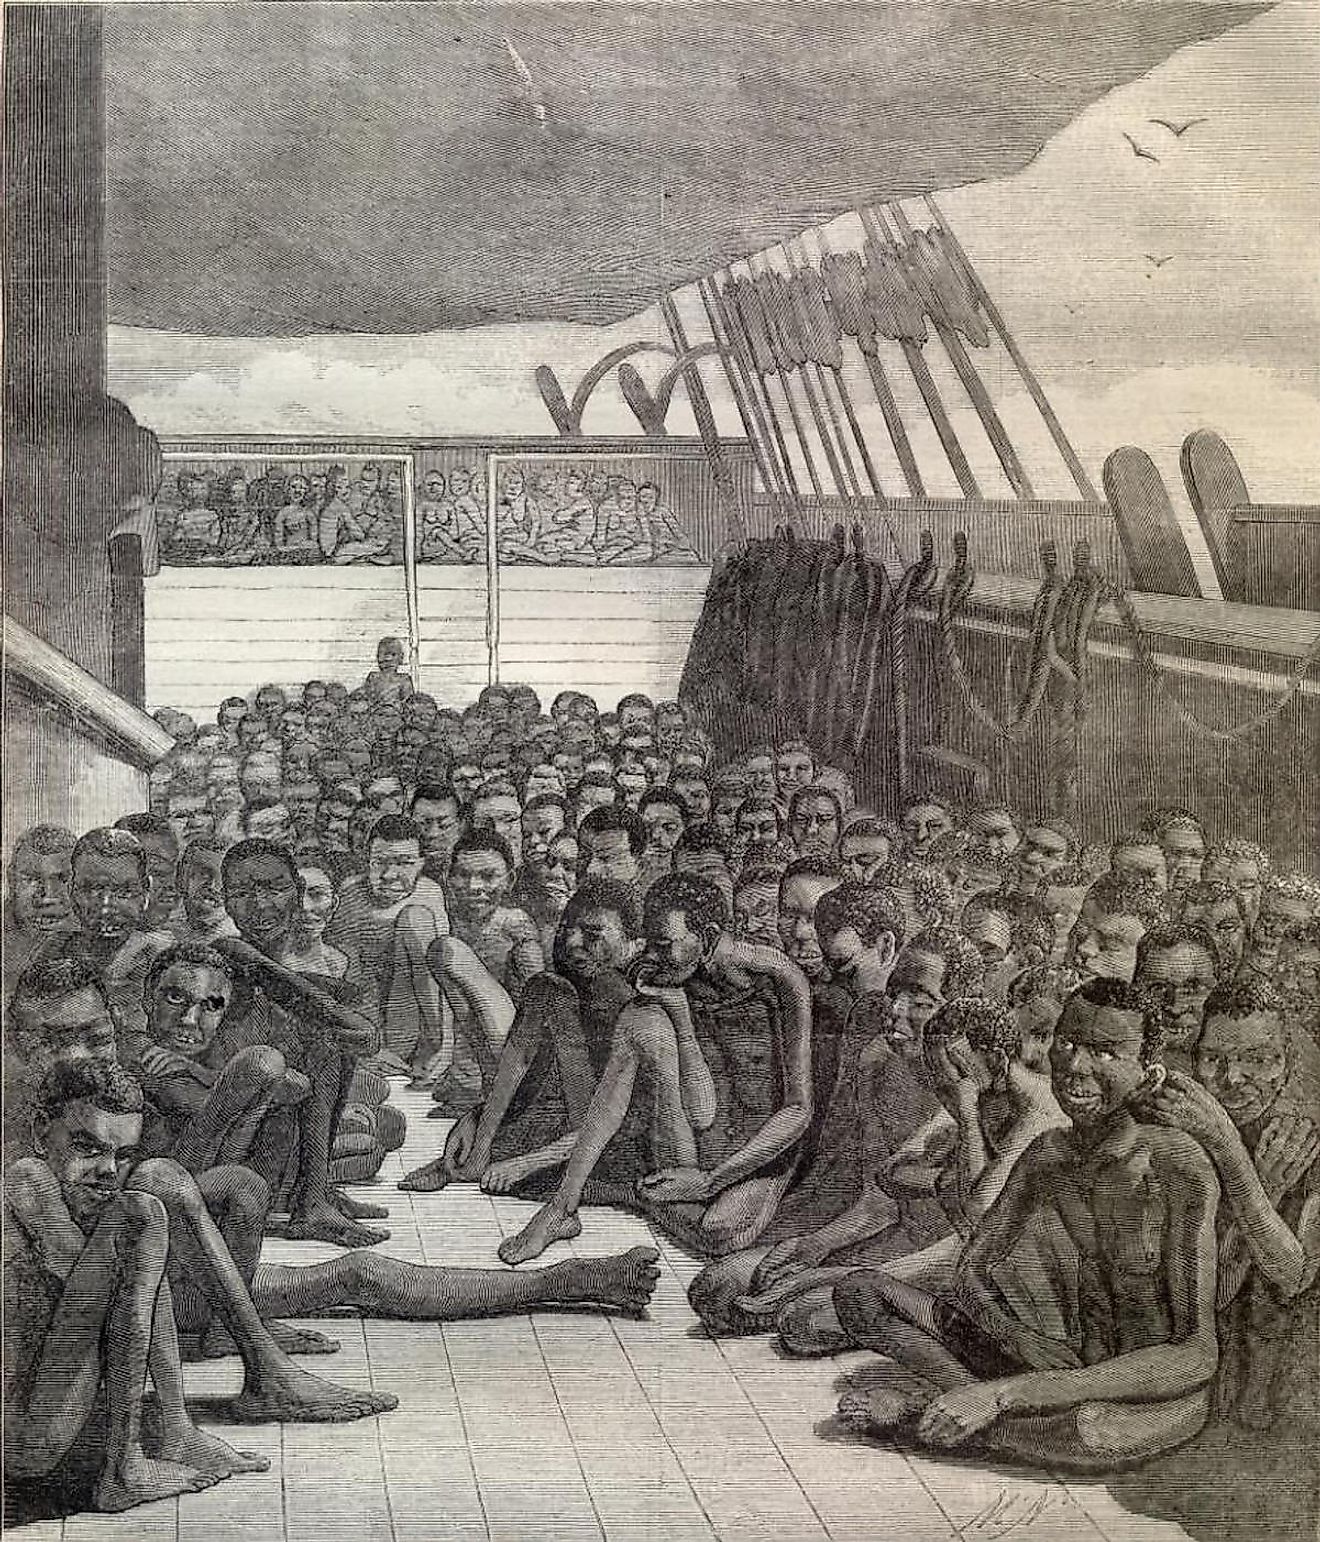 Illustration of slave ship used to transport slaves to Europe and the Americas. Image credit: Luciana Mc Namara/FAL